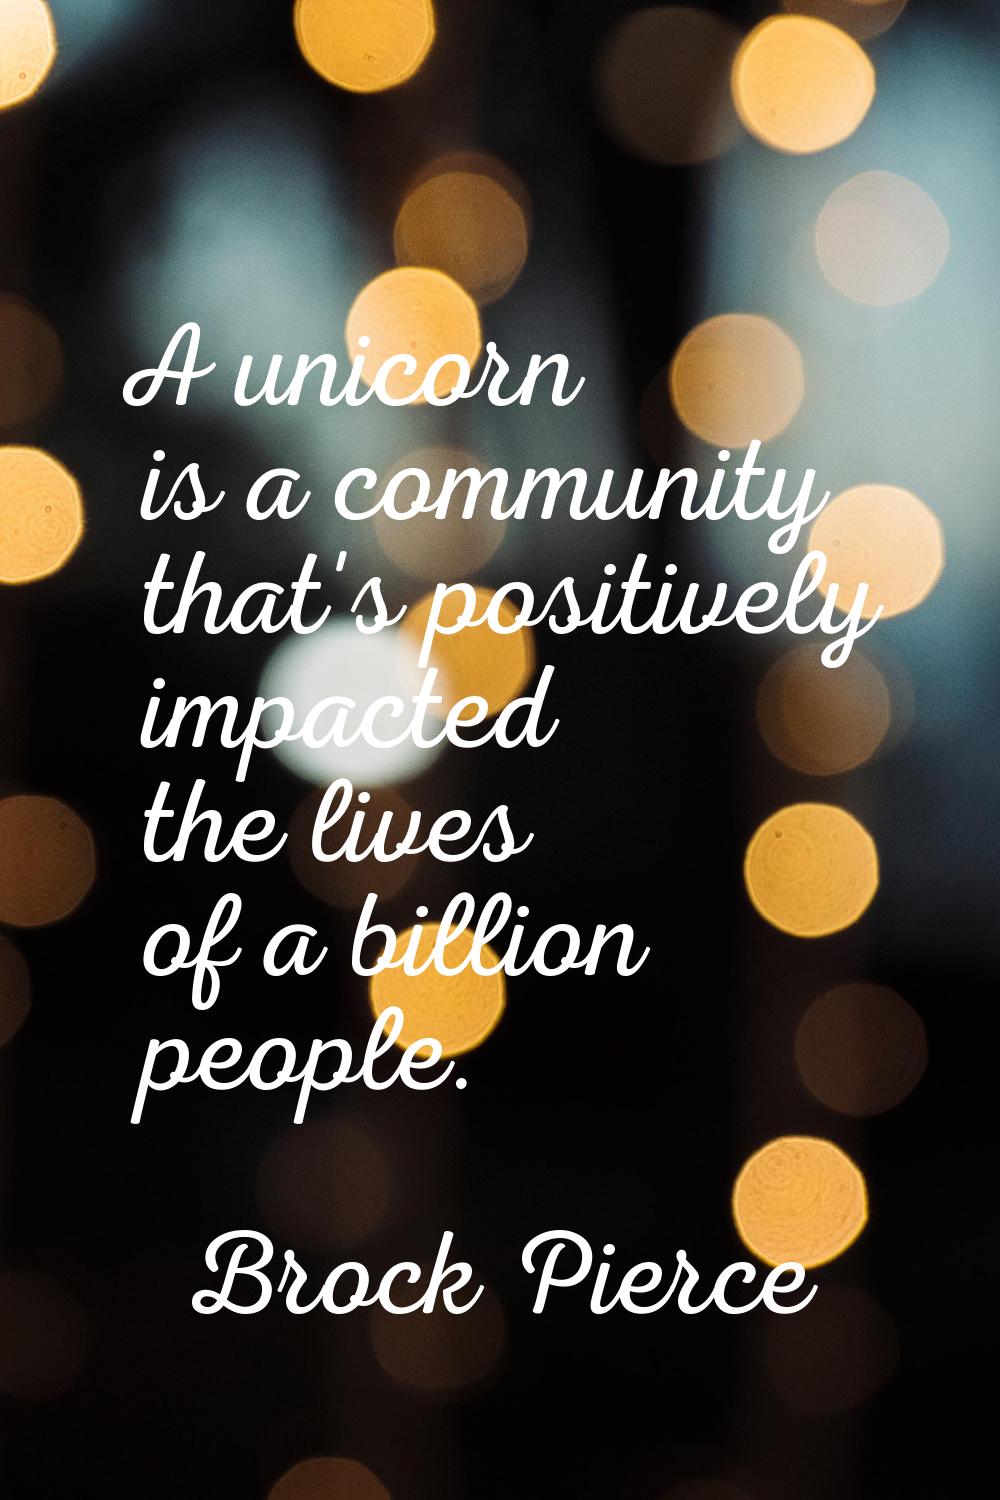 A unicorn is a community that's positively impacted the lives of a billion people.